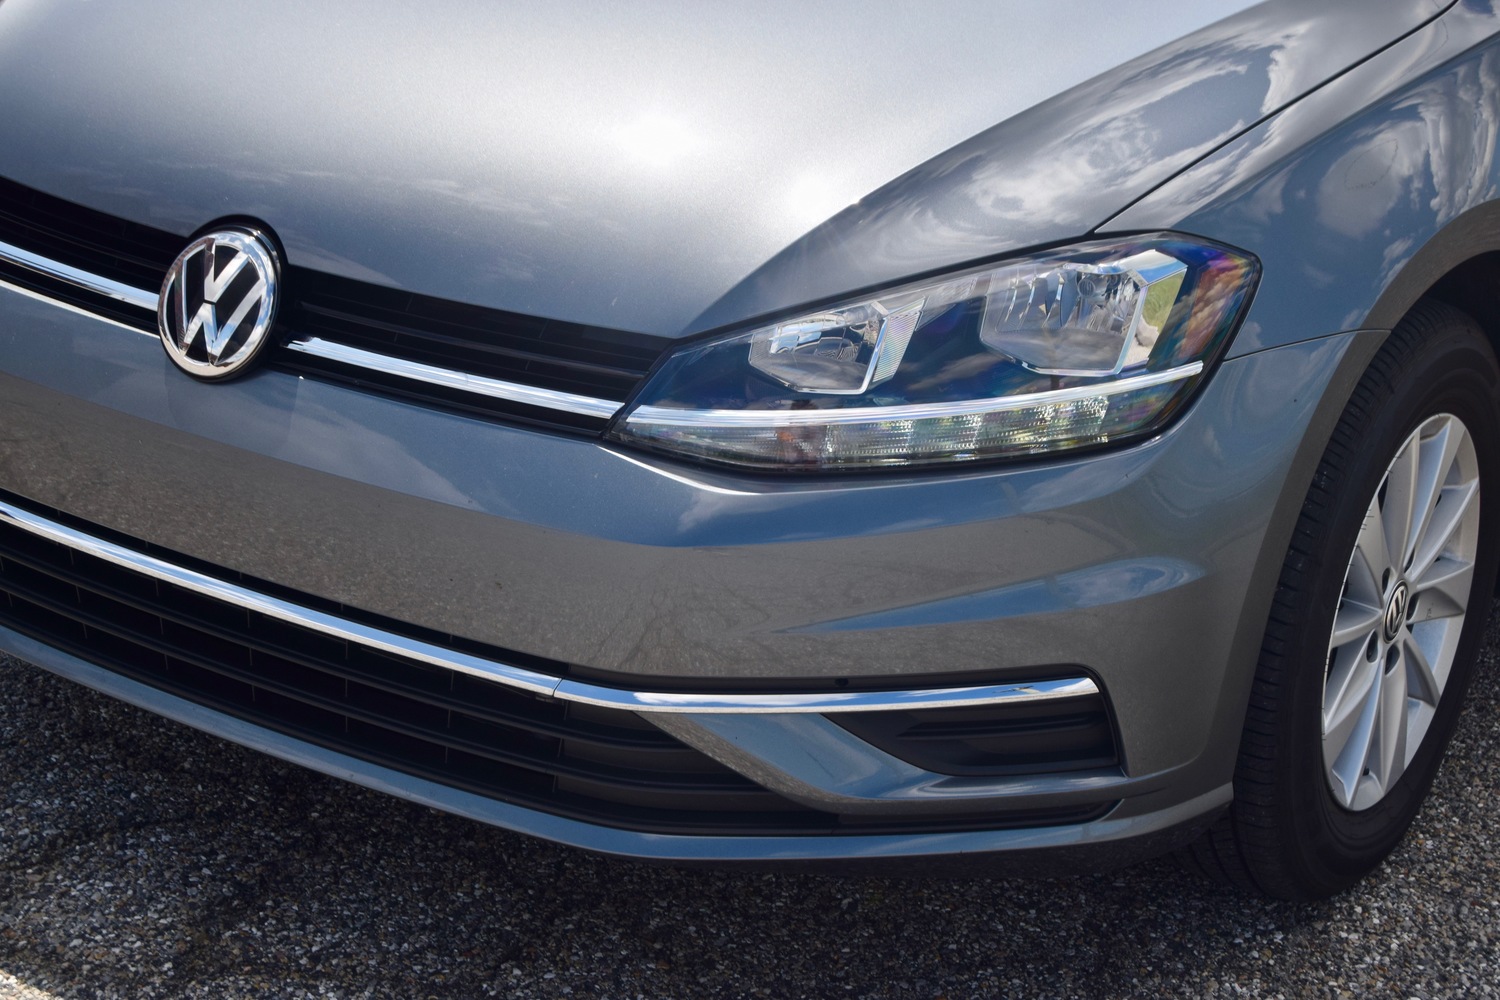 The 2019 VW Golf S Review: A Fun Hatch That Can Do Everything